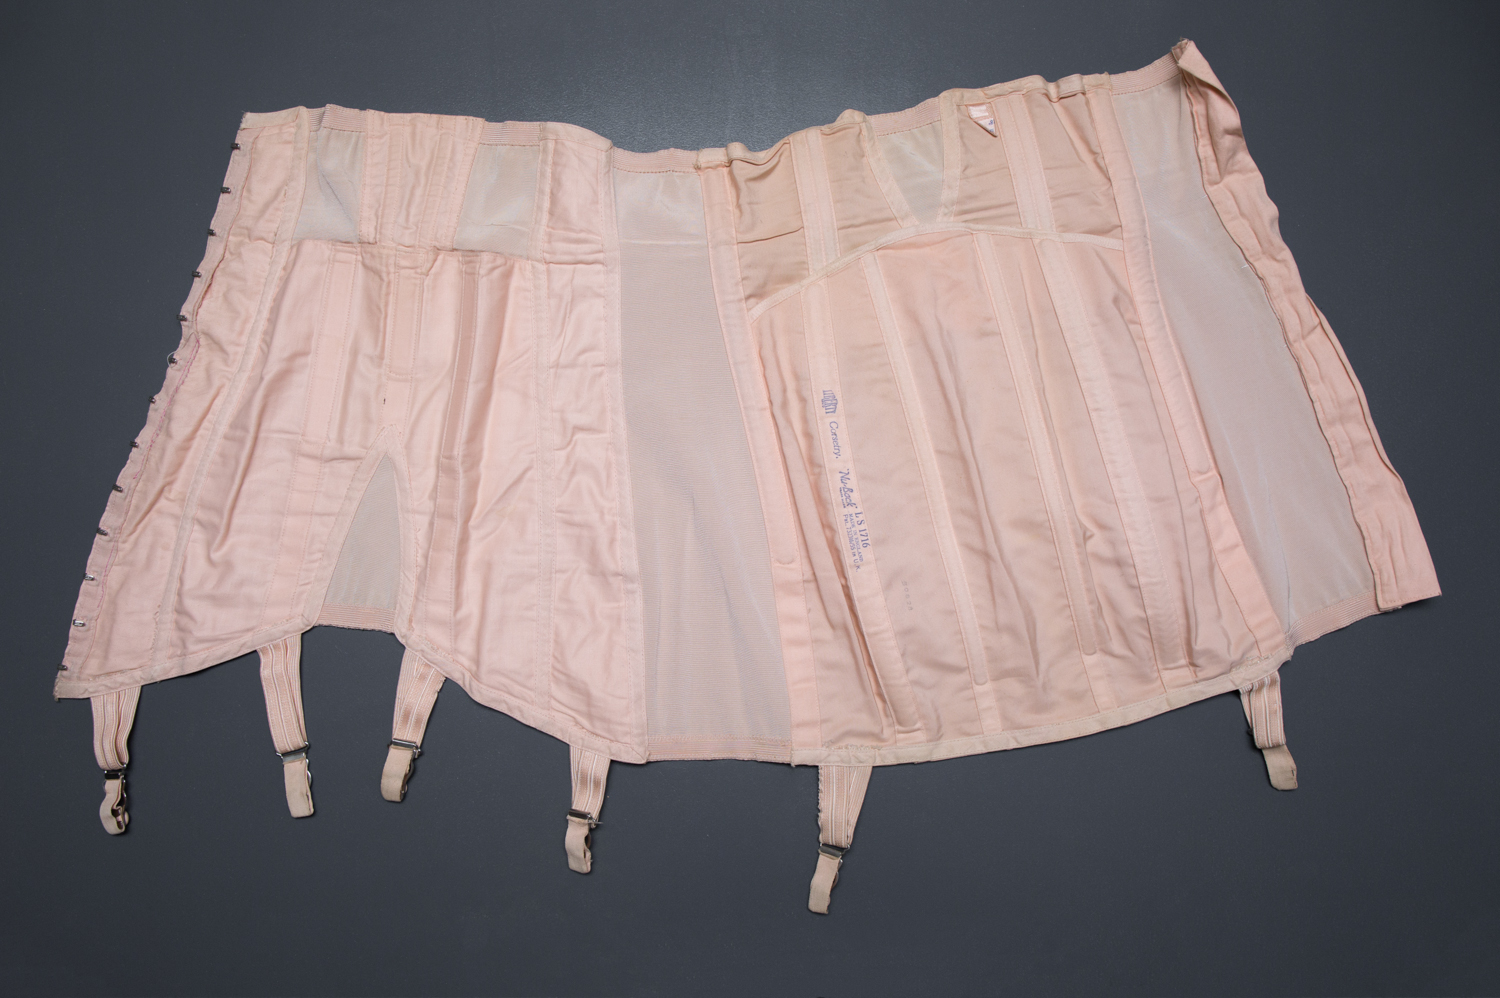 'Nu-Back' Girdle By Liberty, c. 1950s, Great Britain. The Underpinnings Museum. Photography by Tigz Rice.